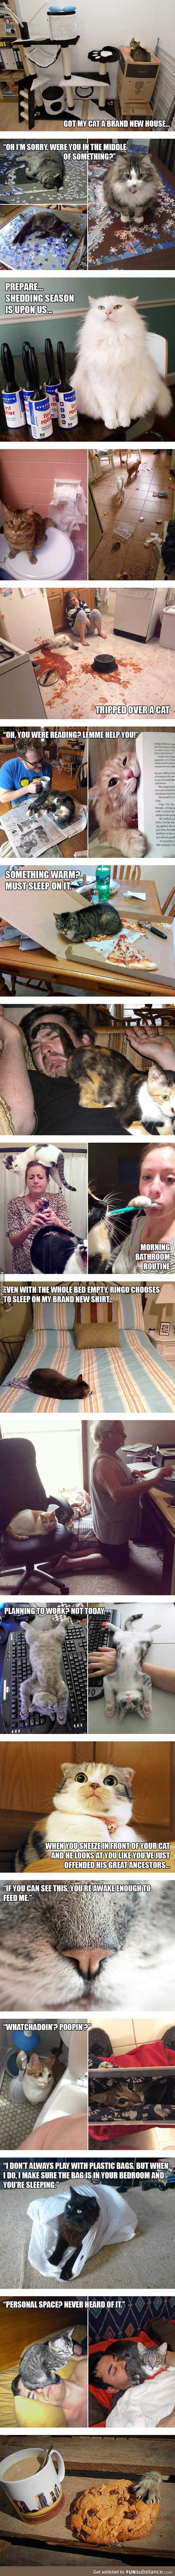 Hilarious struggles only cat owners will understand